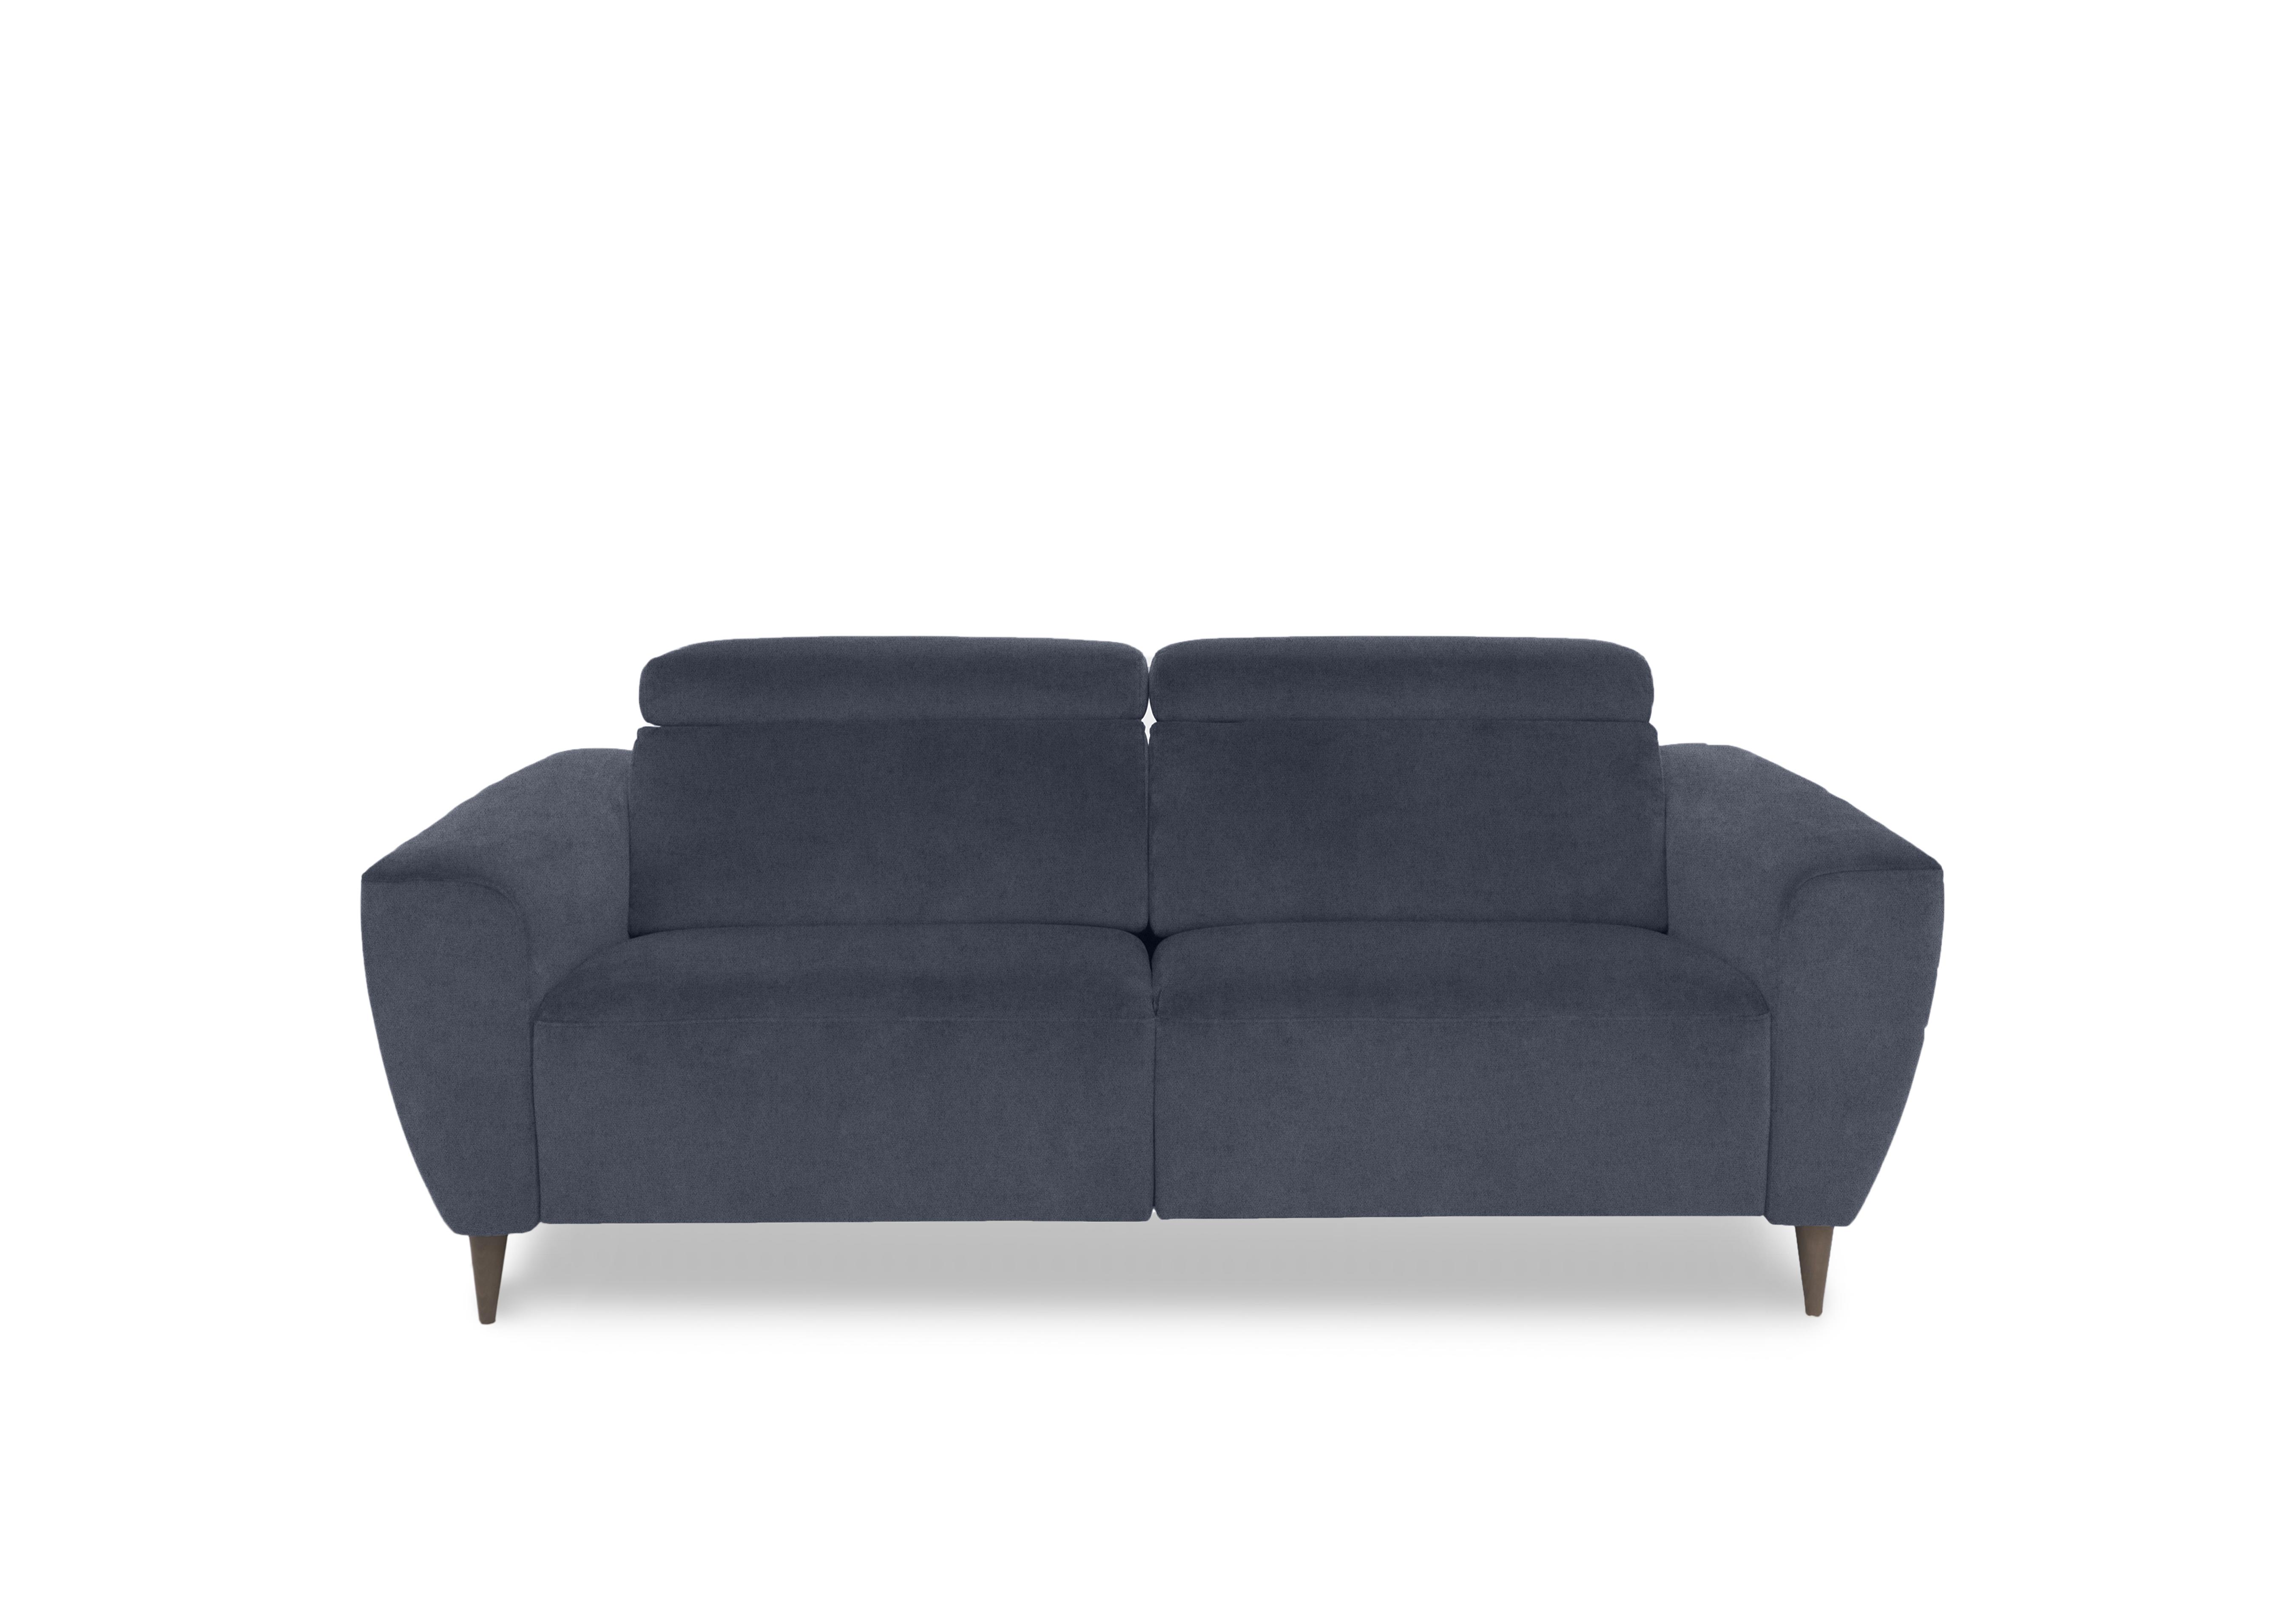 Milano 2.5 Seater Fabric Sofa in Fuente Ocean To Ft on Furniture Village